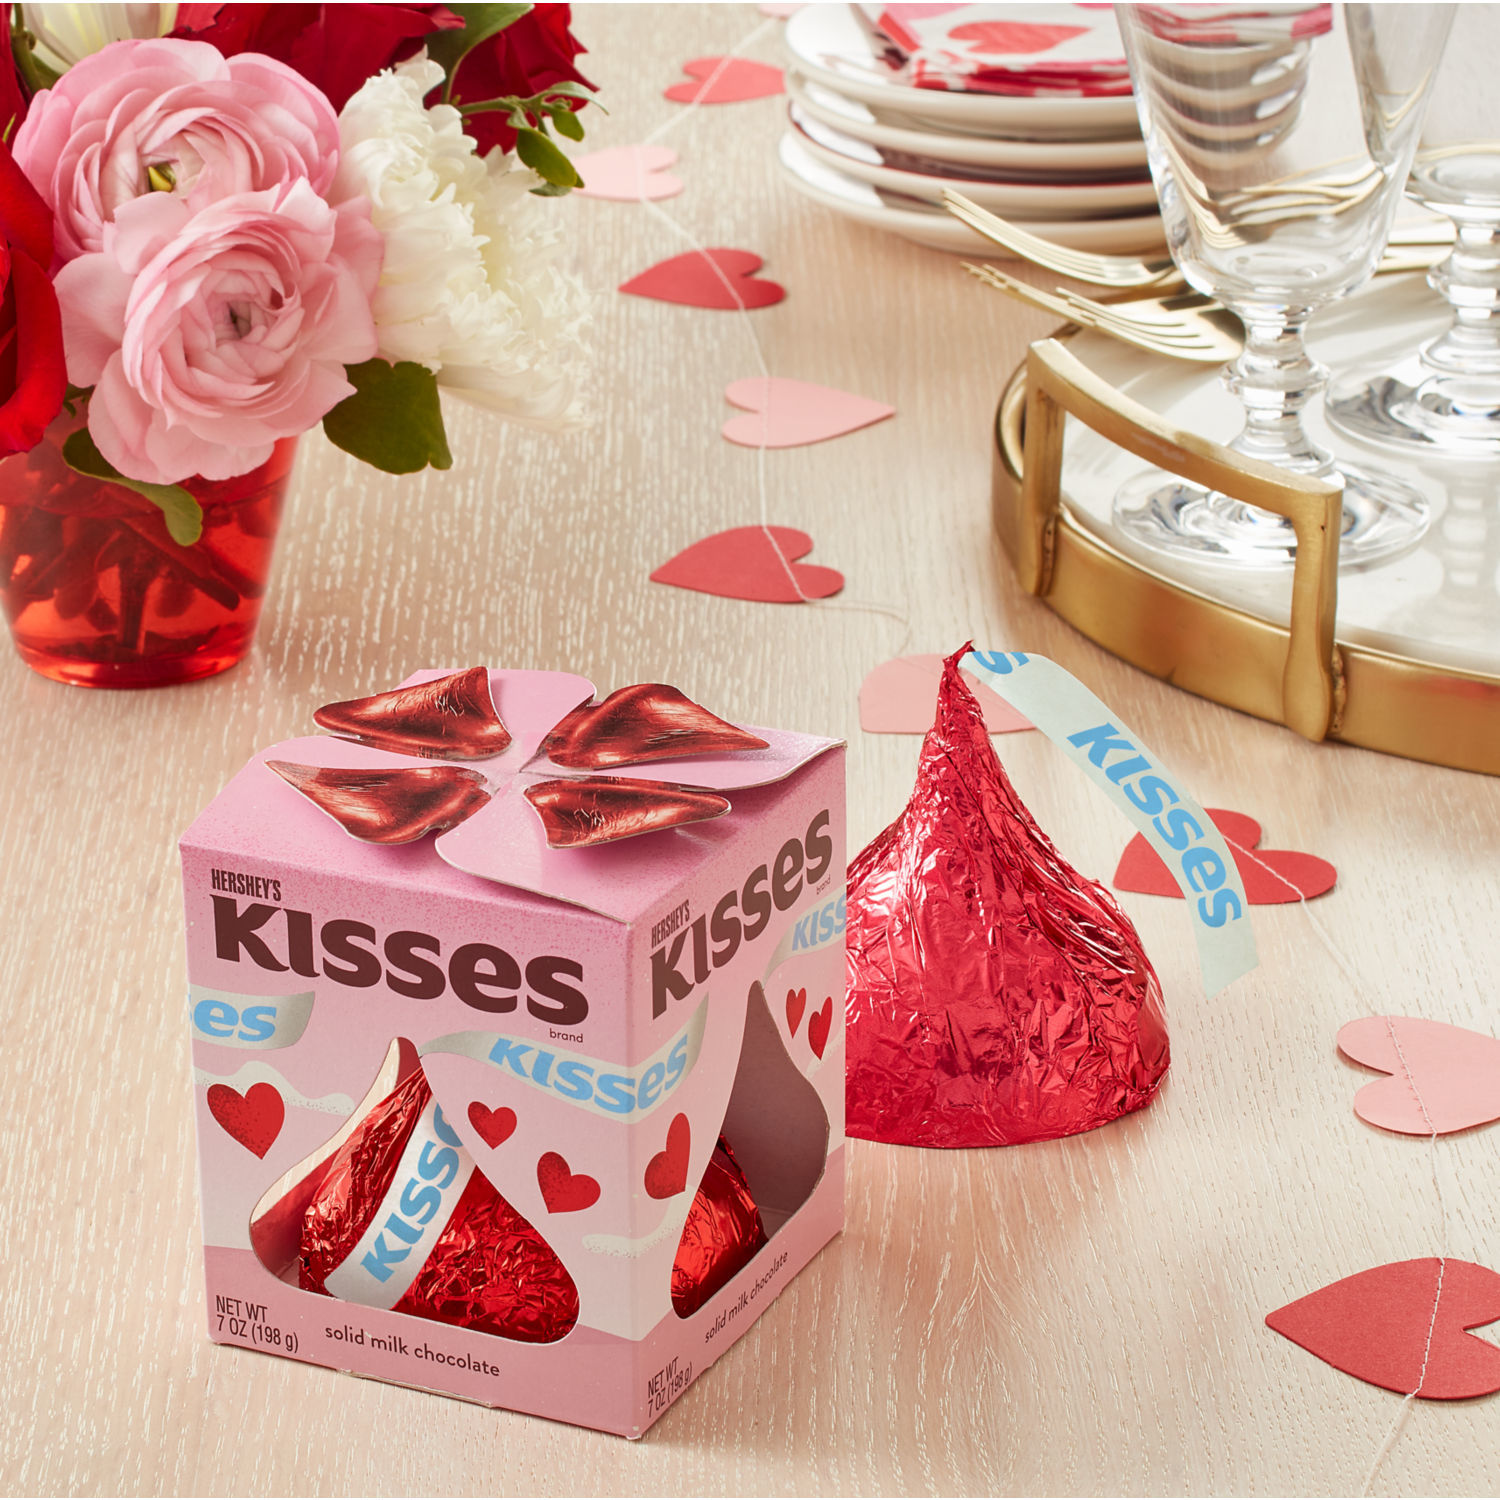 Hershey's Kisses Solid Milk Chocolate Valentine's Day Candy, Gift Box 7 oz - image 5 of 6